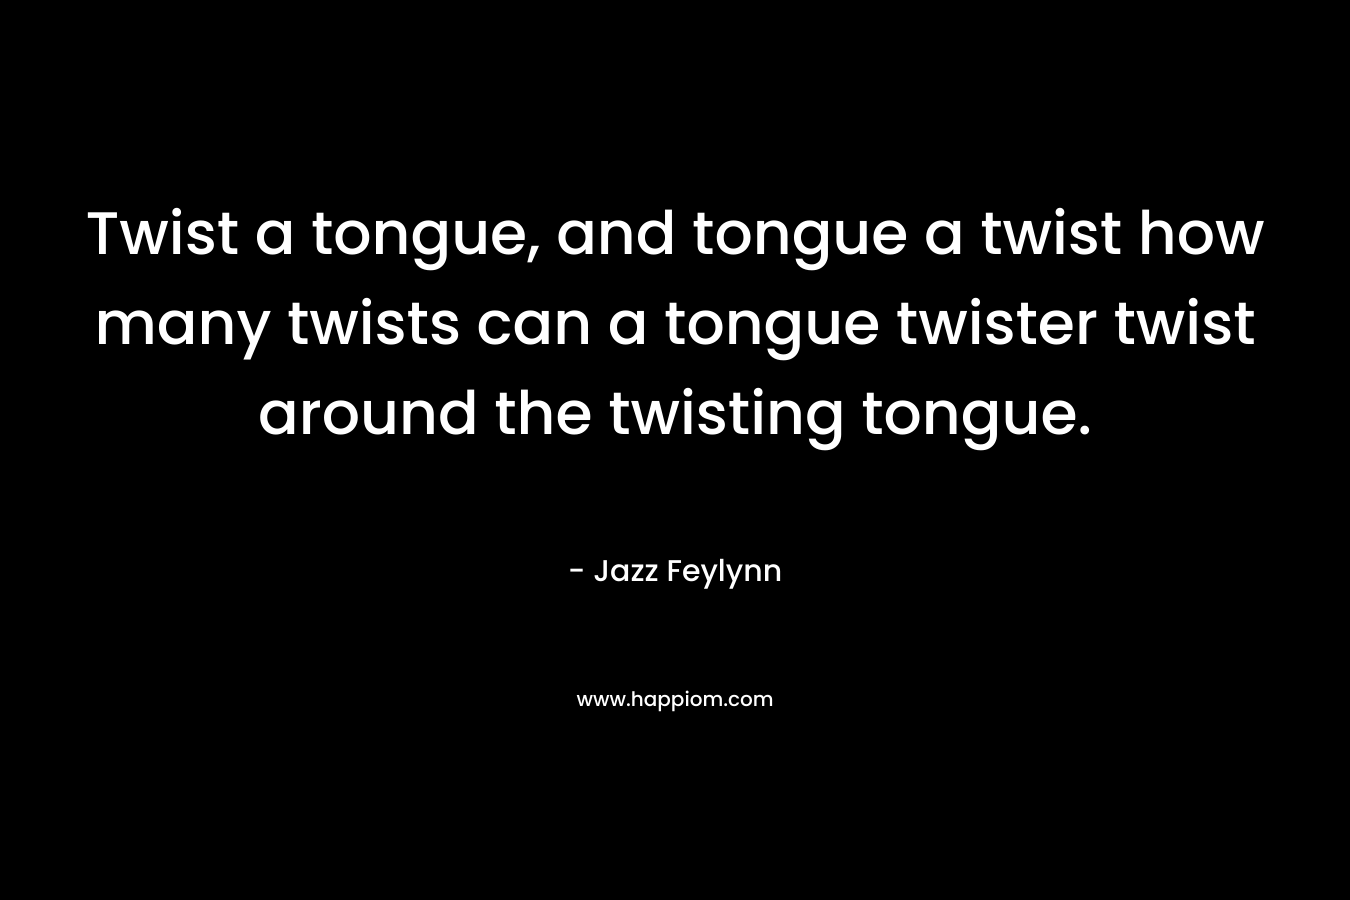 Twist a tongue, and tongue a twist how many twists can a tongue twister twist around the twisting tongue.